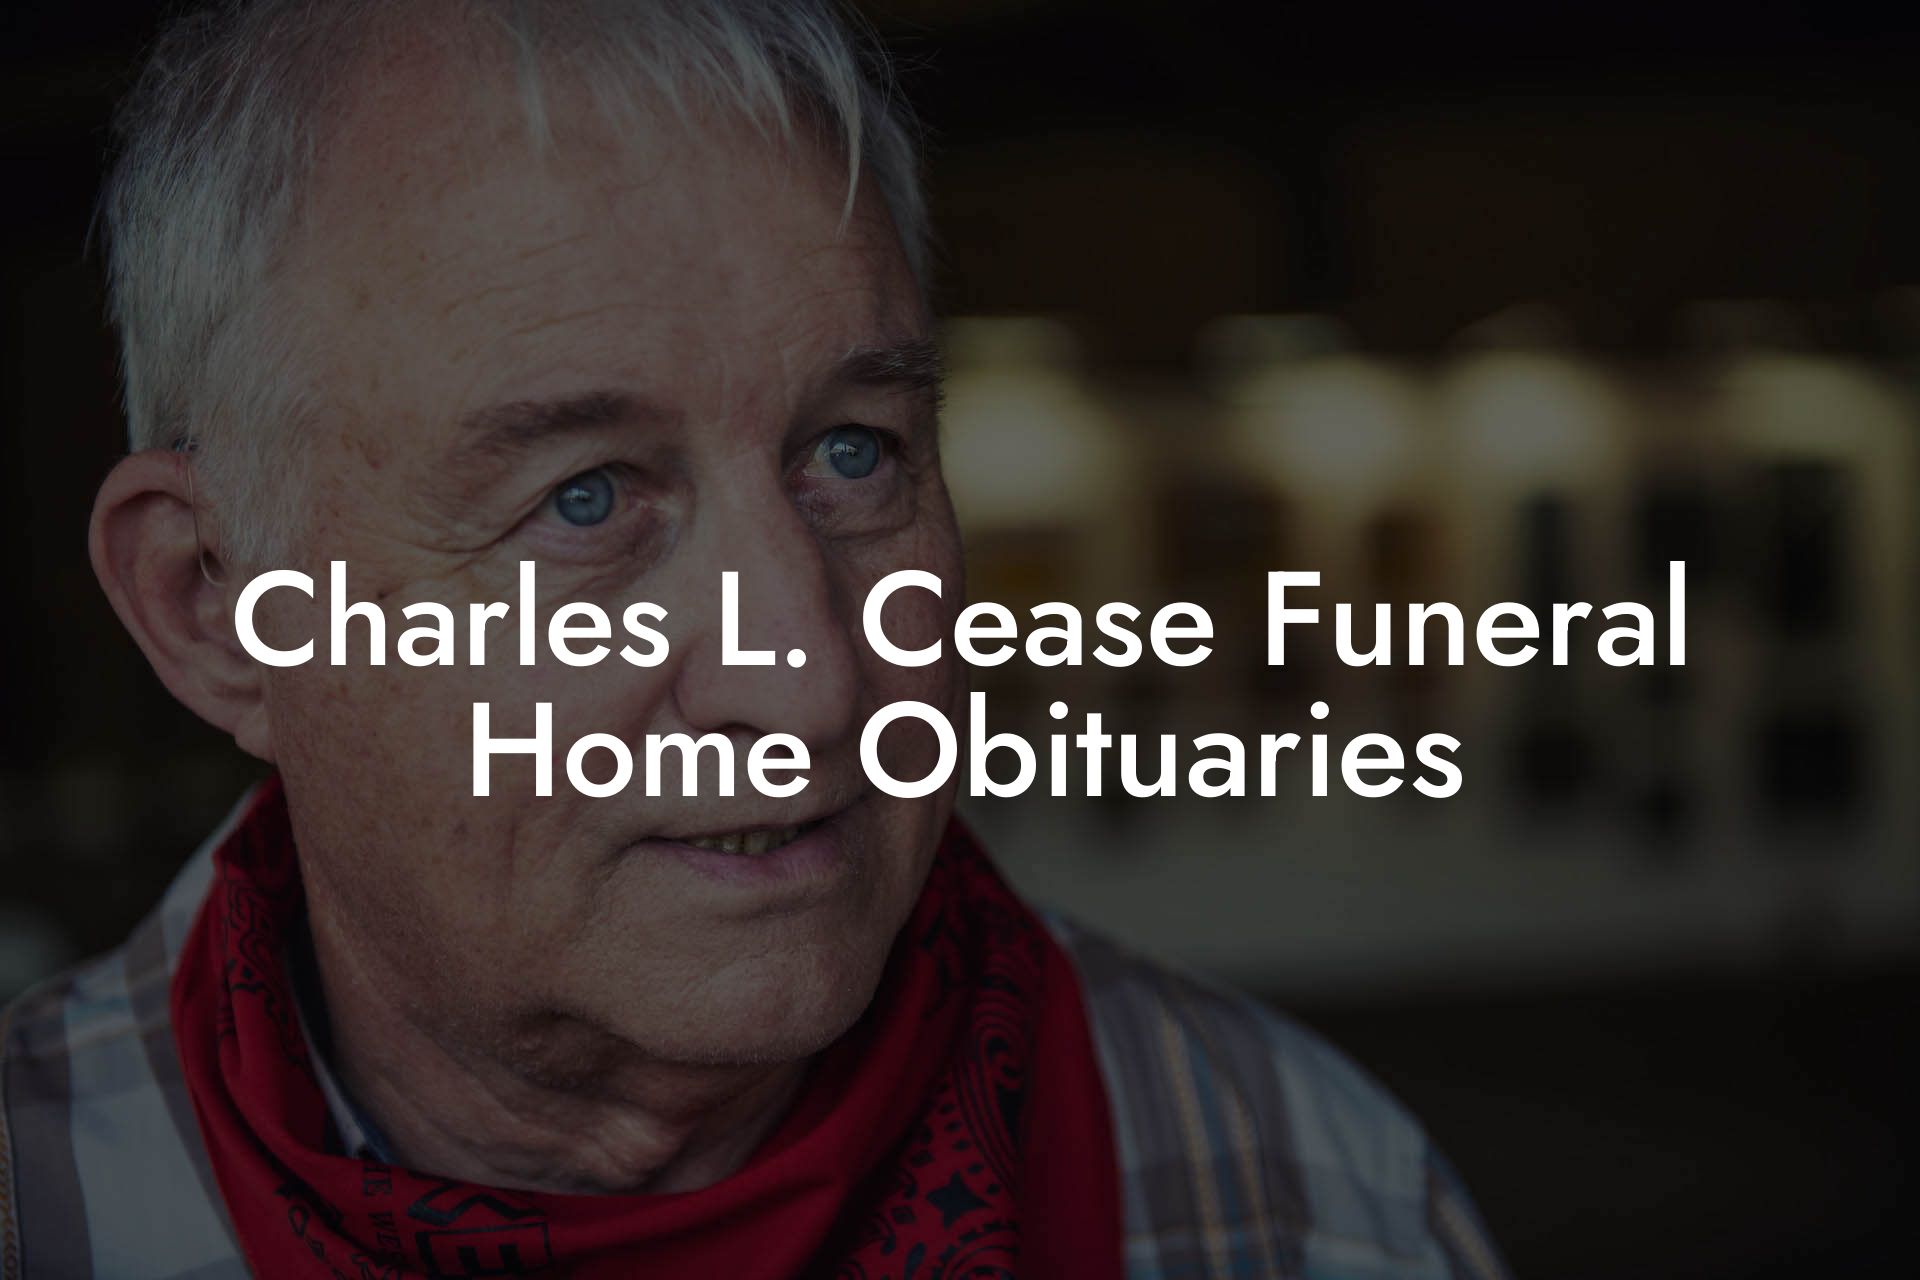 Charles L. Cease Funeral Home Obituaries